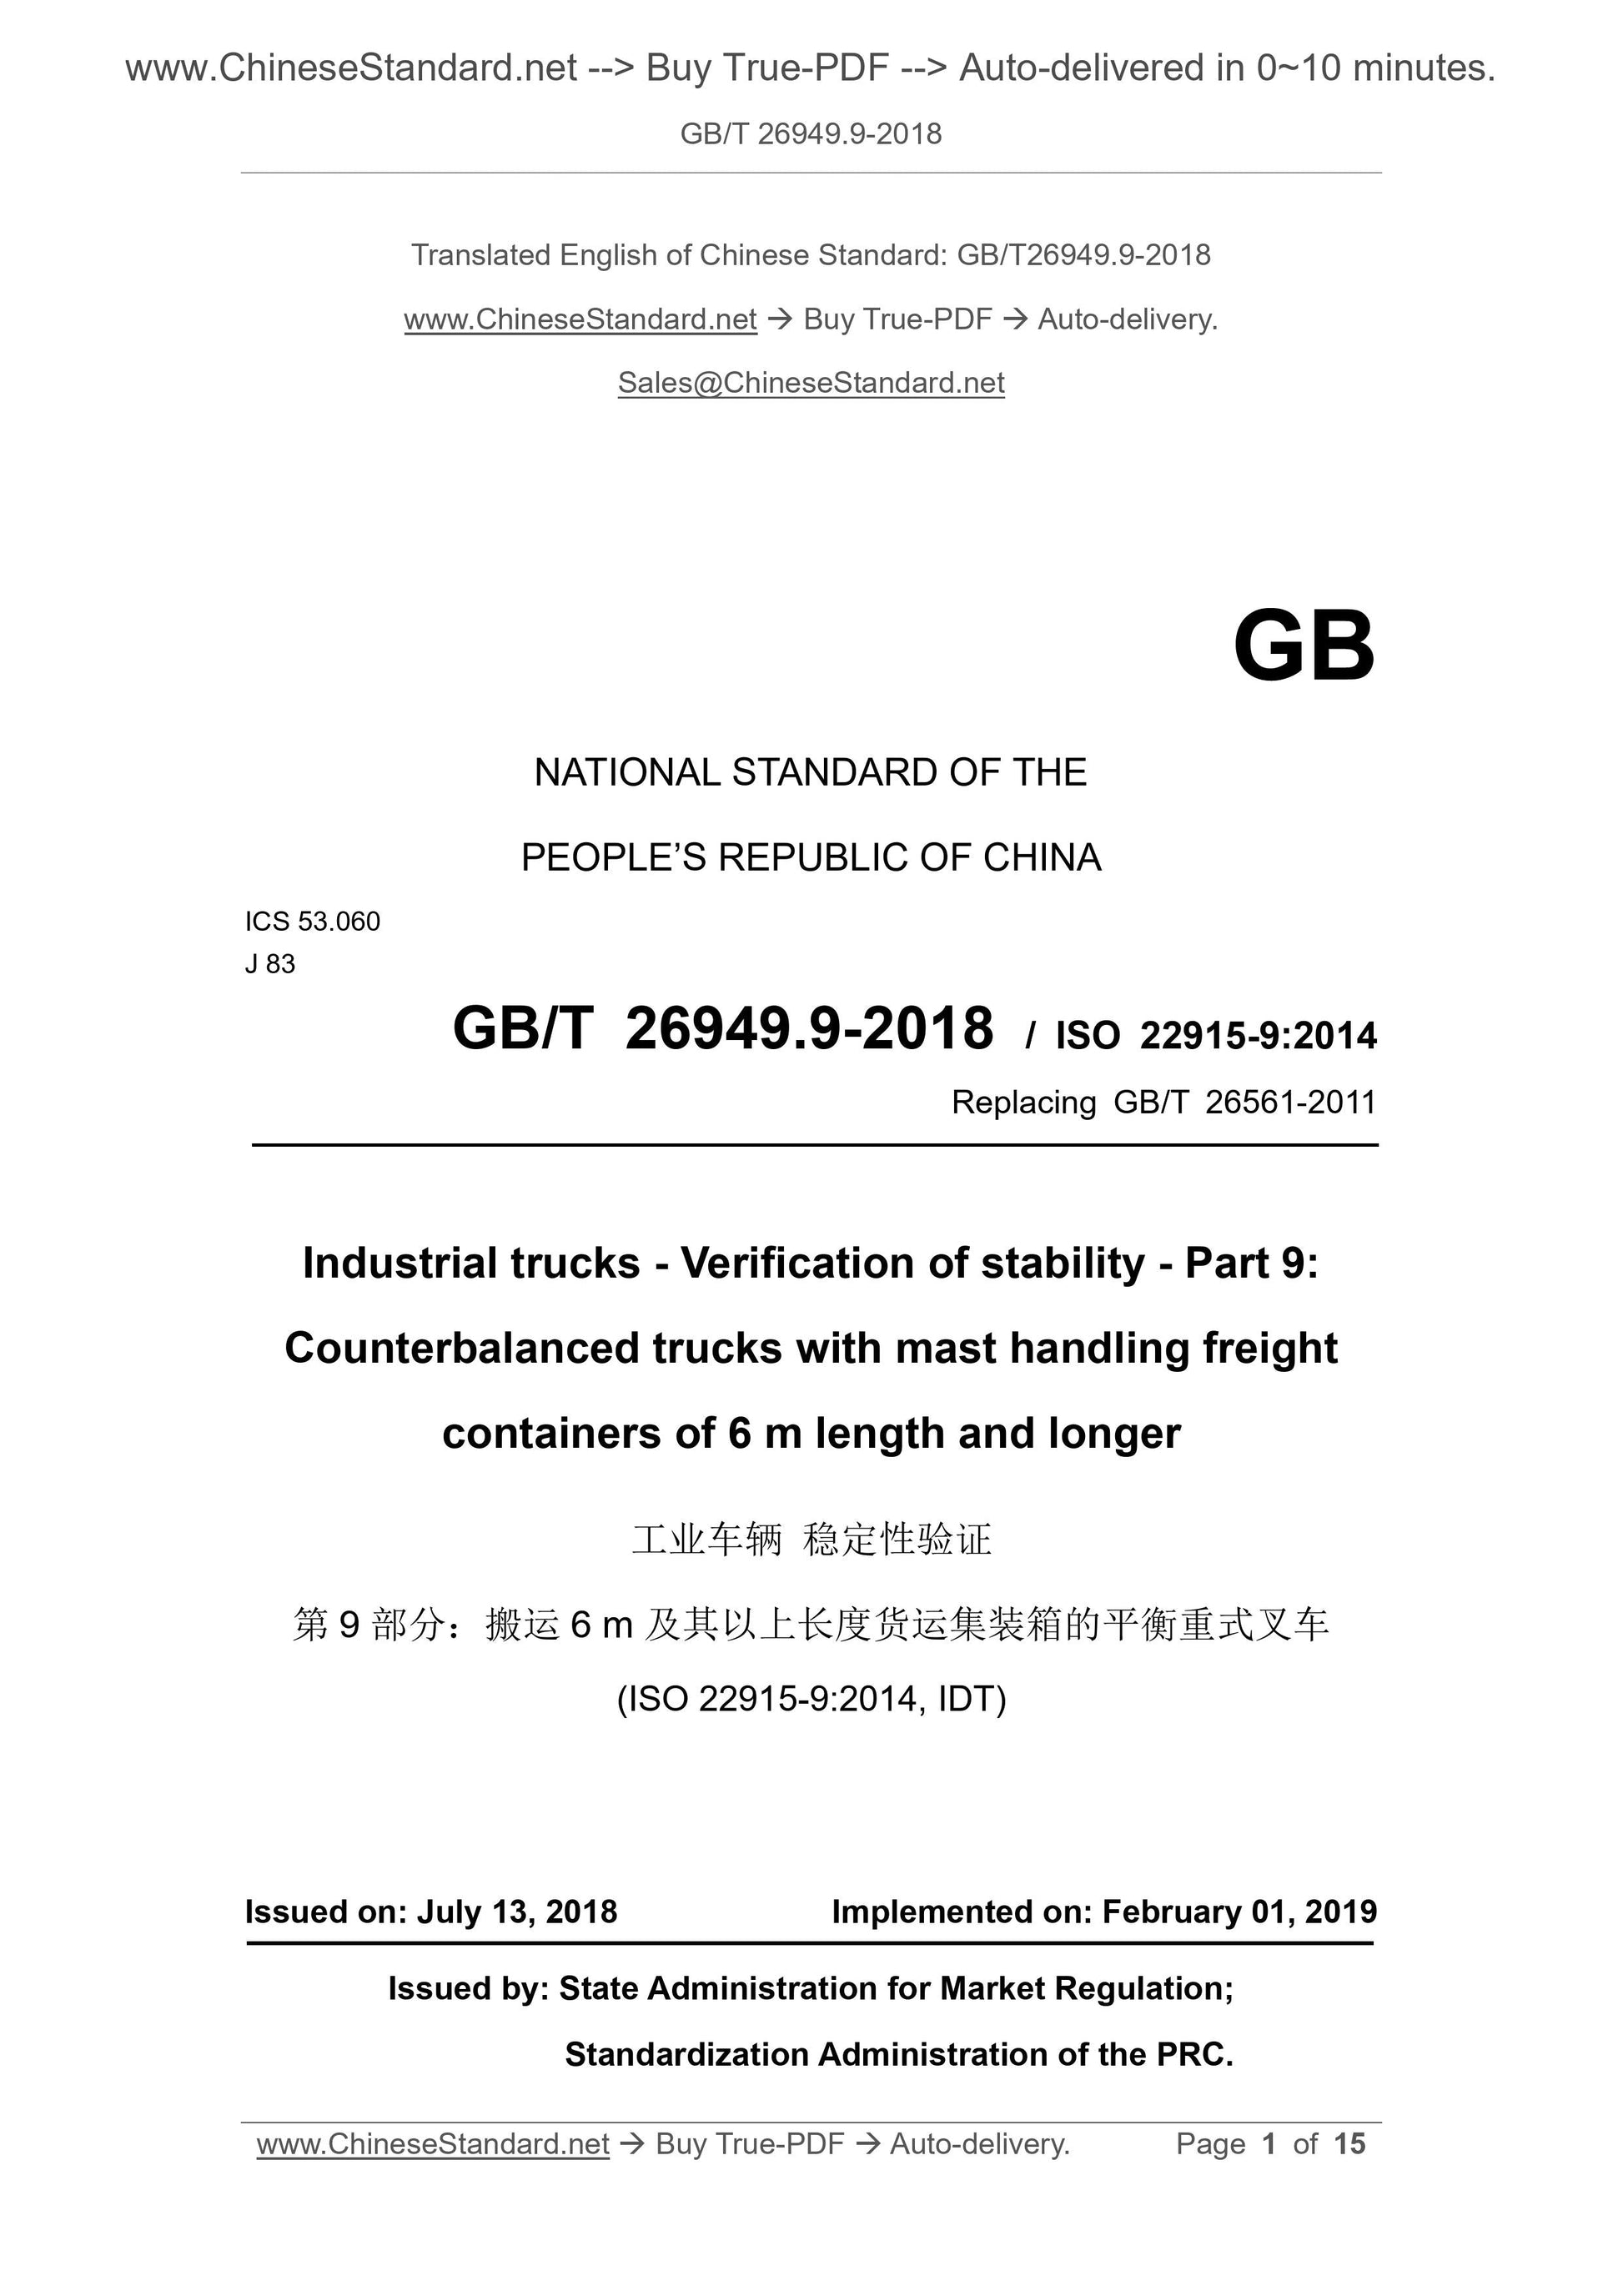 GB/T 26949.9-2018 Page 1